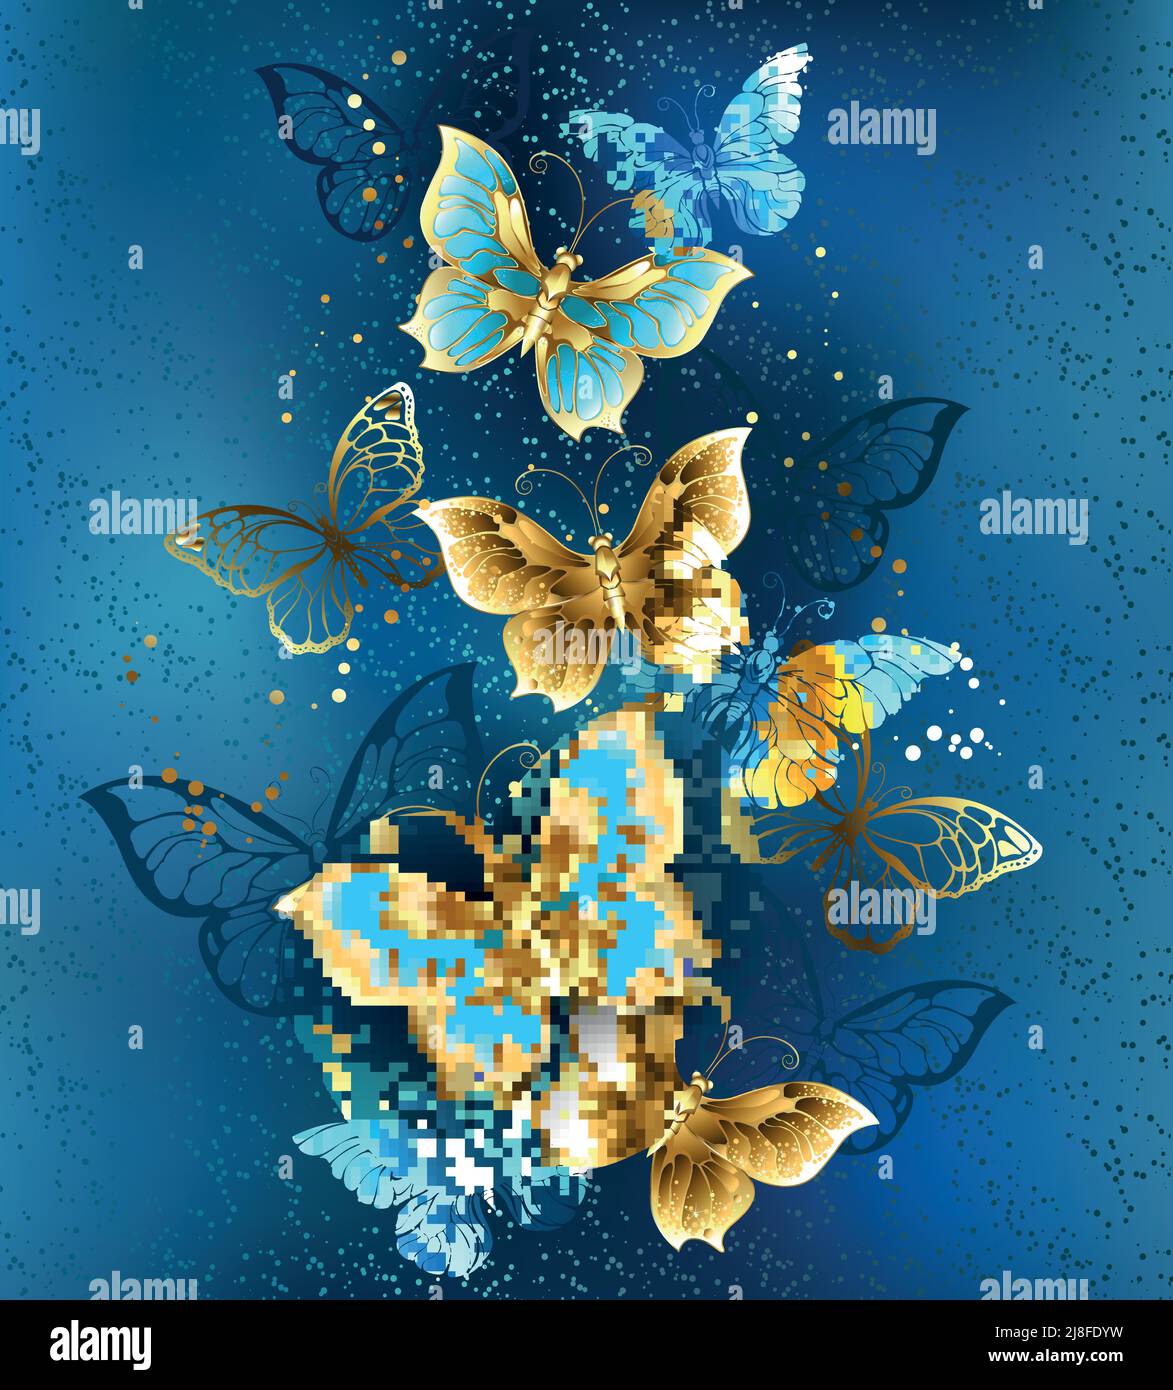 Composition of flying, jewelry, gold and dark butterflies on textured jewelry background. Golden butterfly. Stock Vector